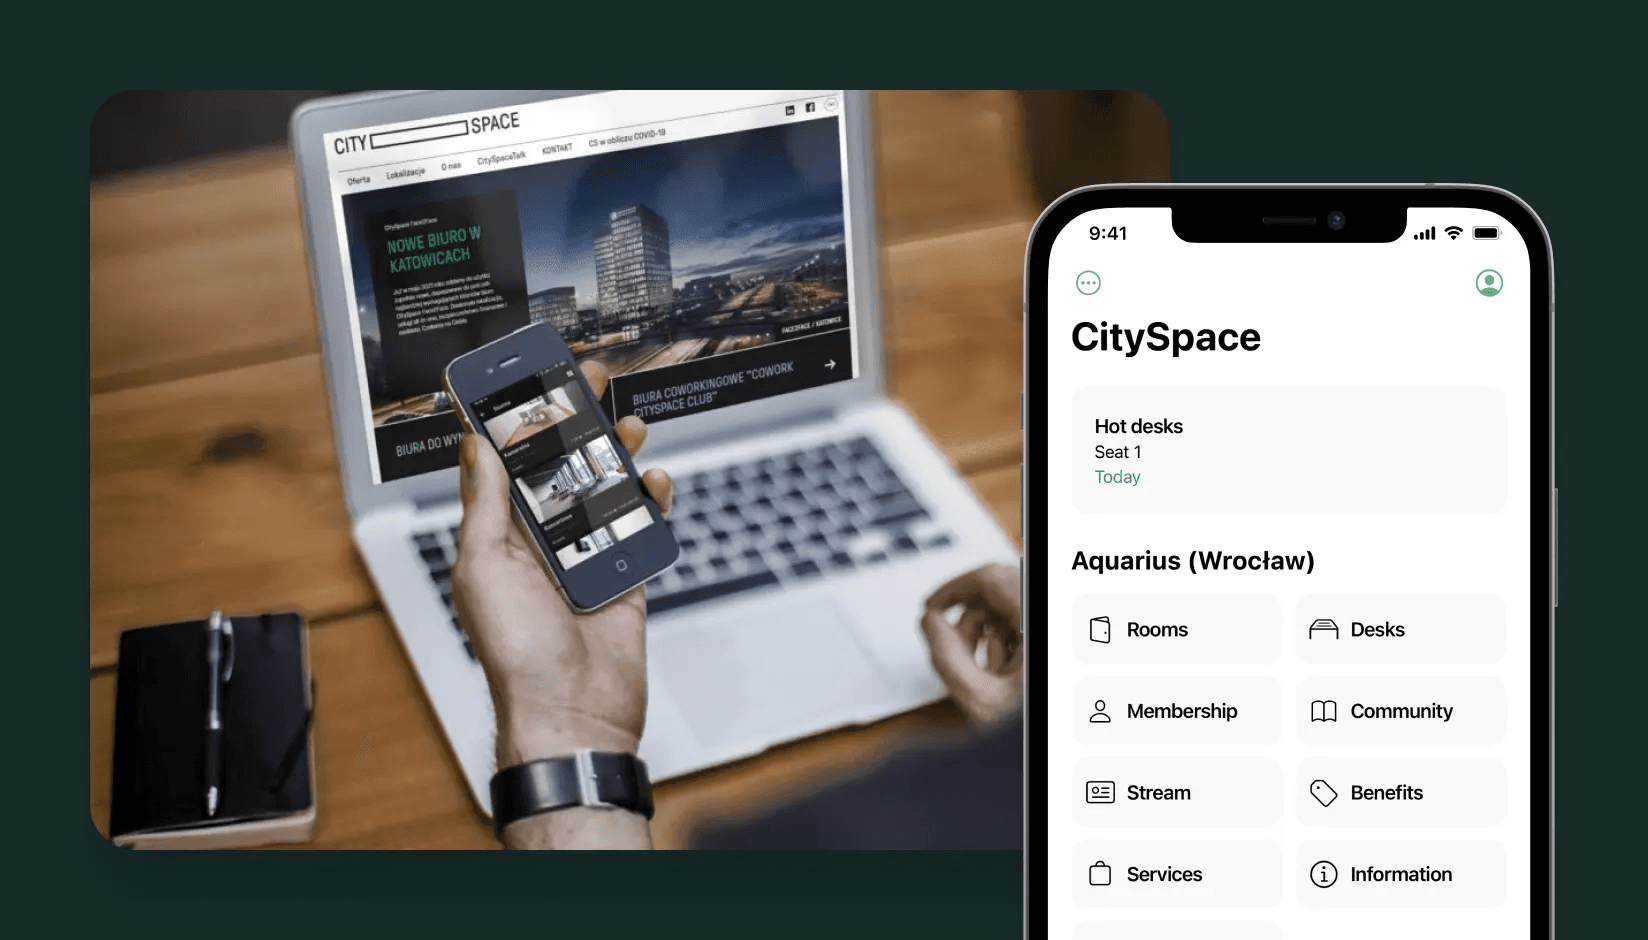 City Space app booking system developed by Spacebring